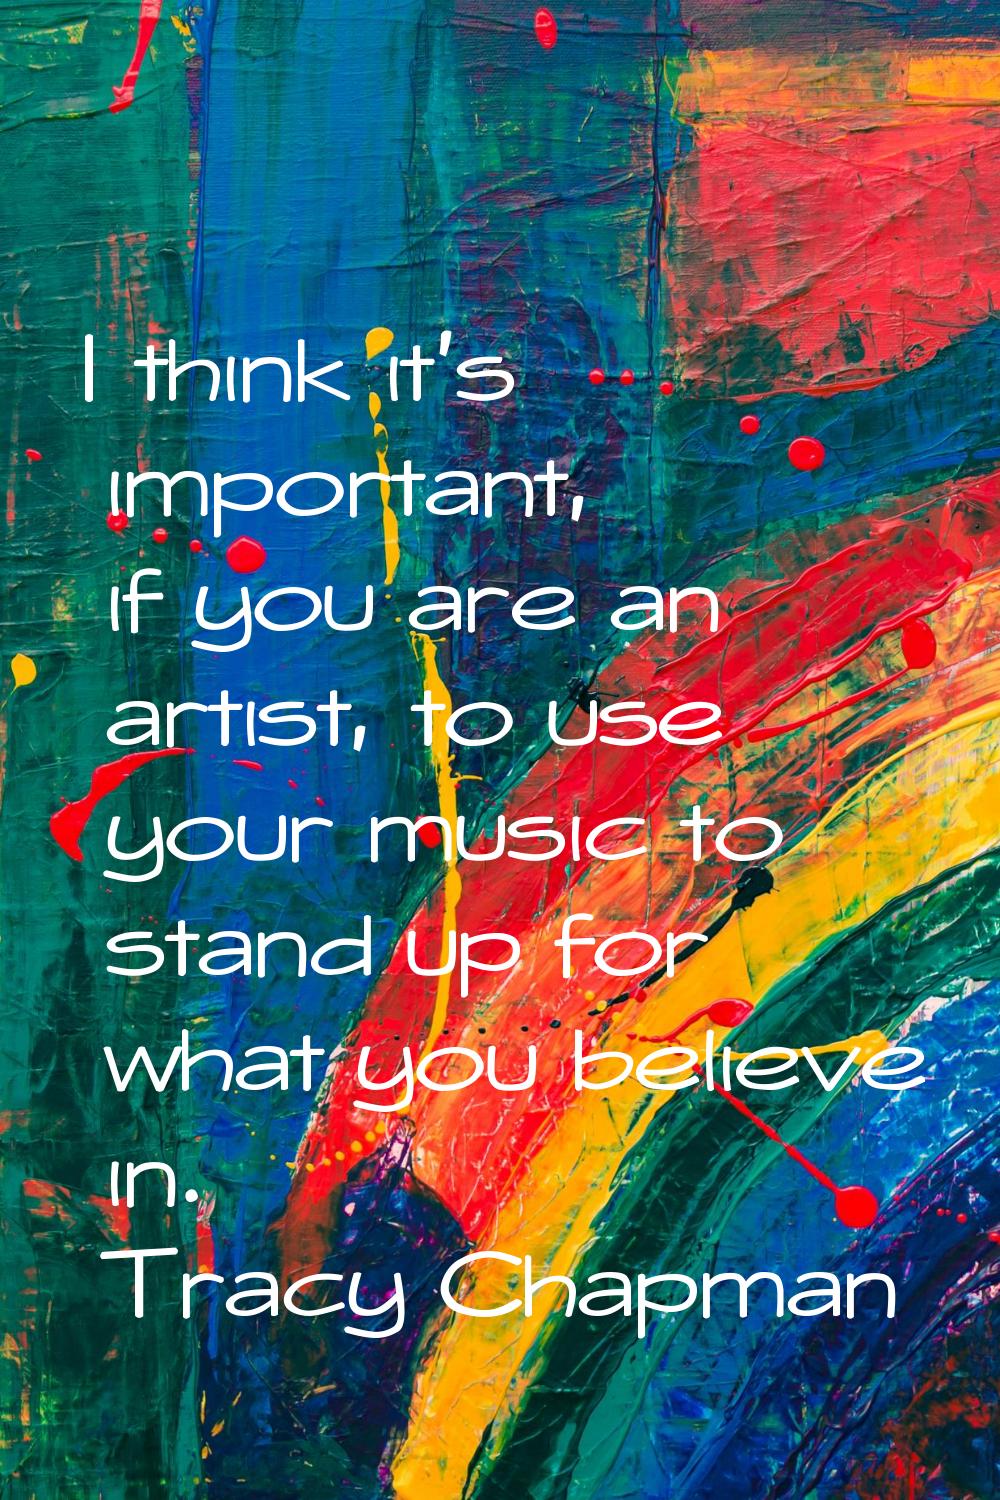 I think it's important, if you are an artist, to use your music to stand up for what you believe in